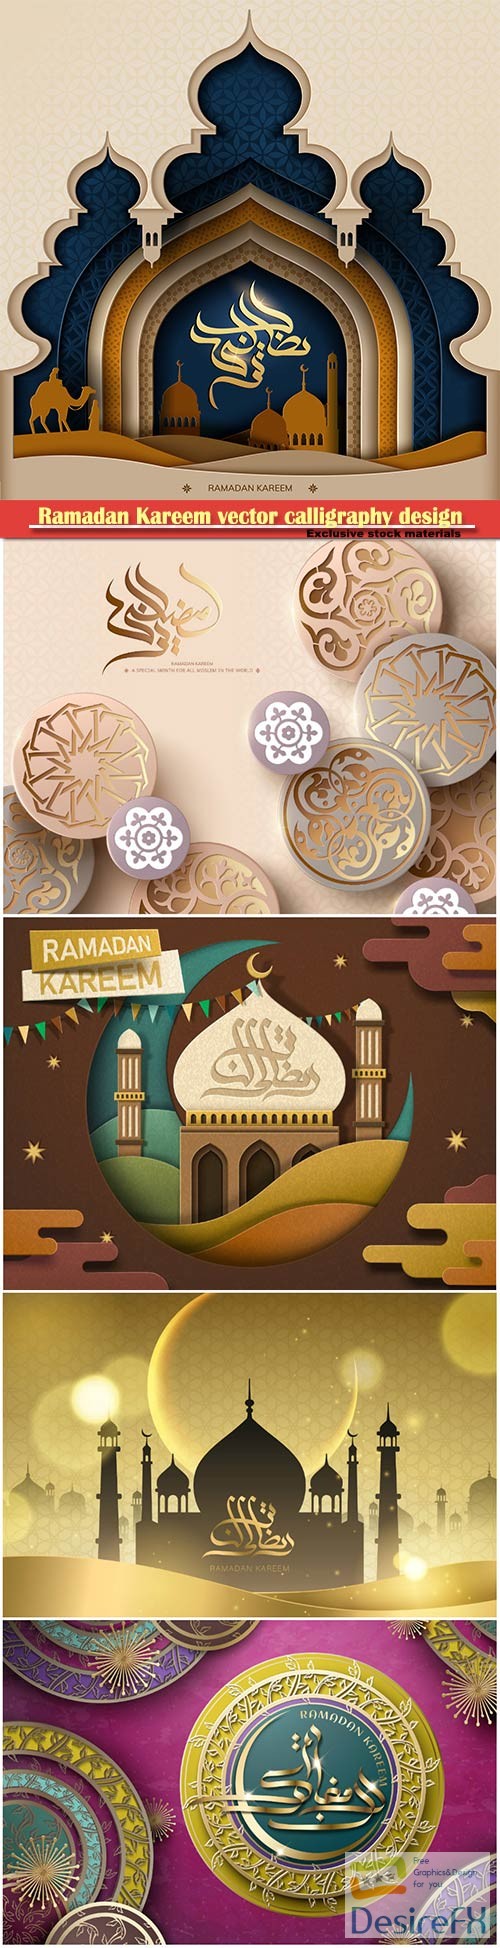 Ramadan Kareem vector calligraphy design with decorative floral pattern,mosque silhouette, crescent and glittering islamic background # 2